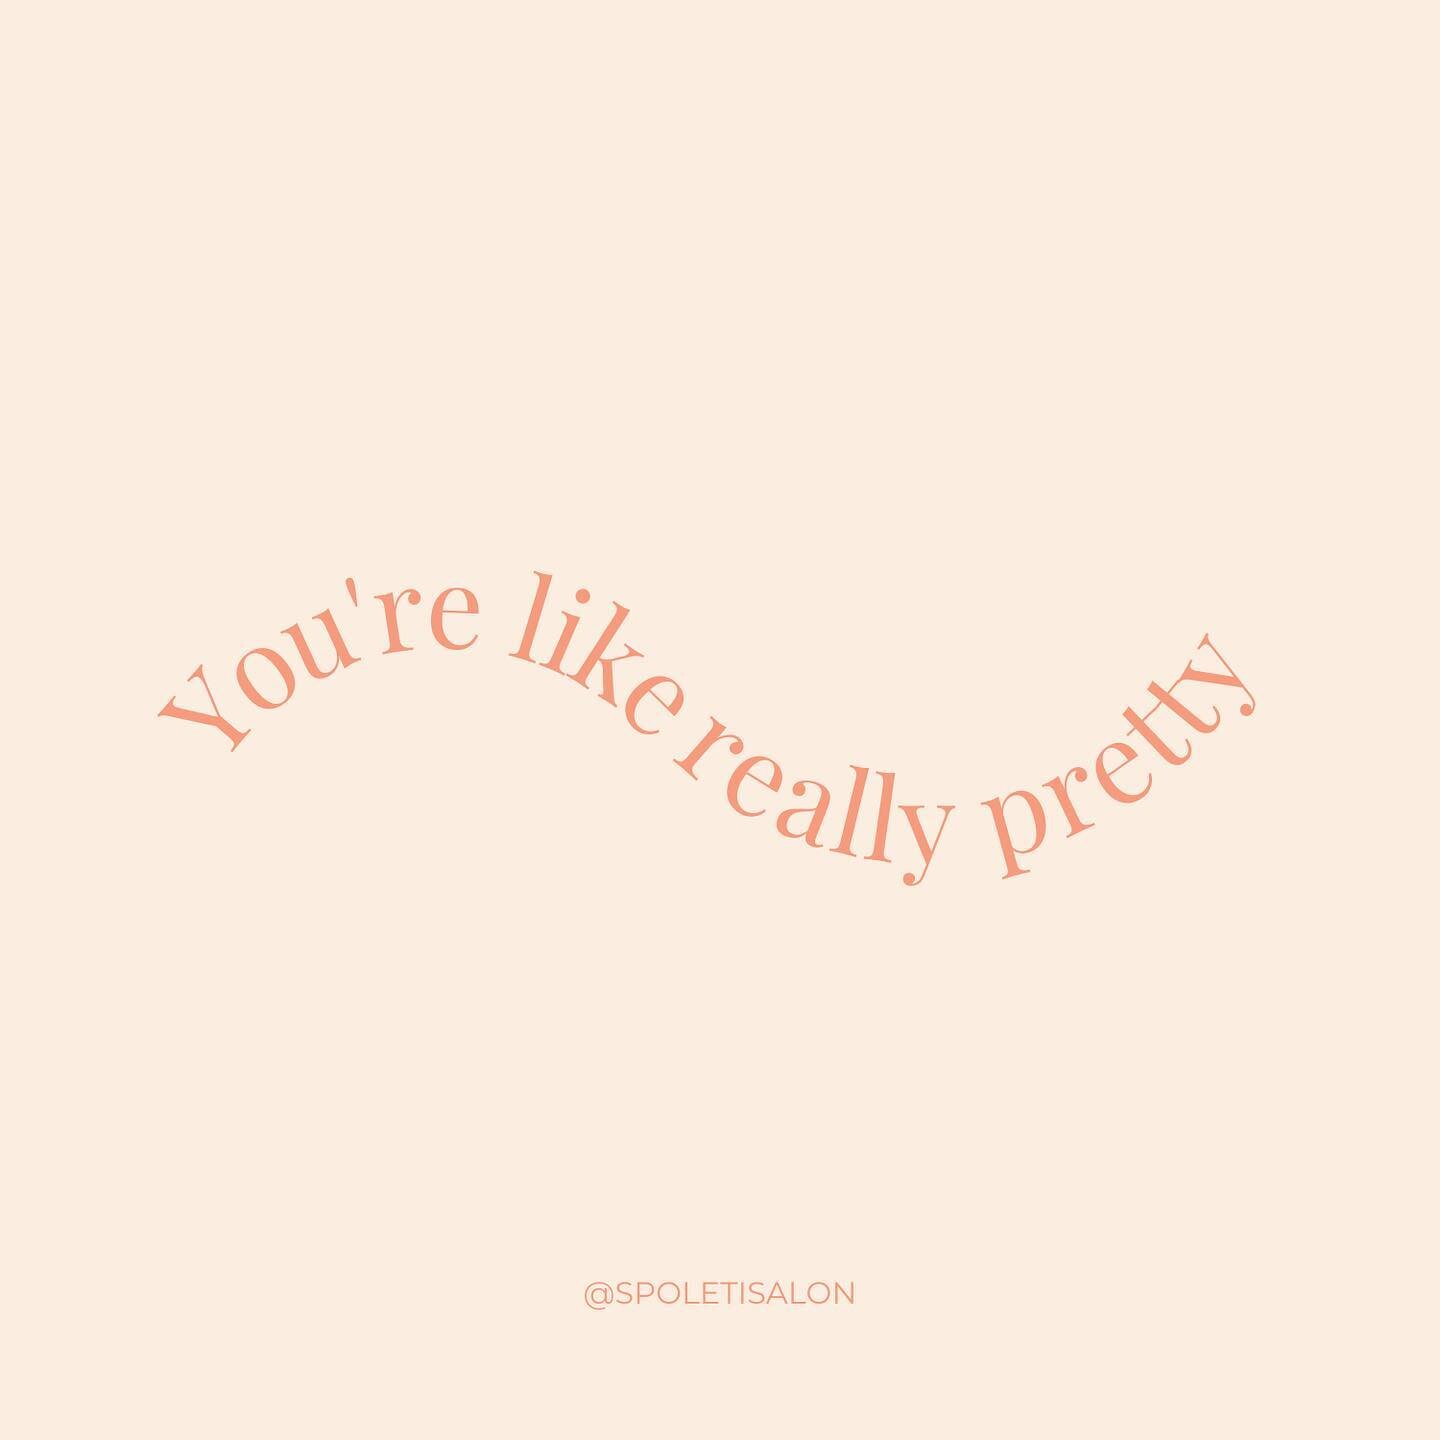 In the famous words of Regina George, we think you&rsquo;re like really pretty 💕